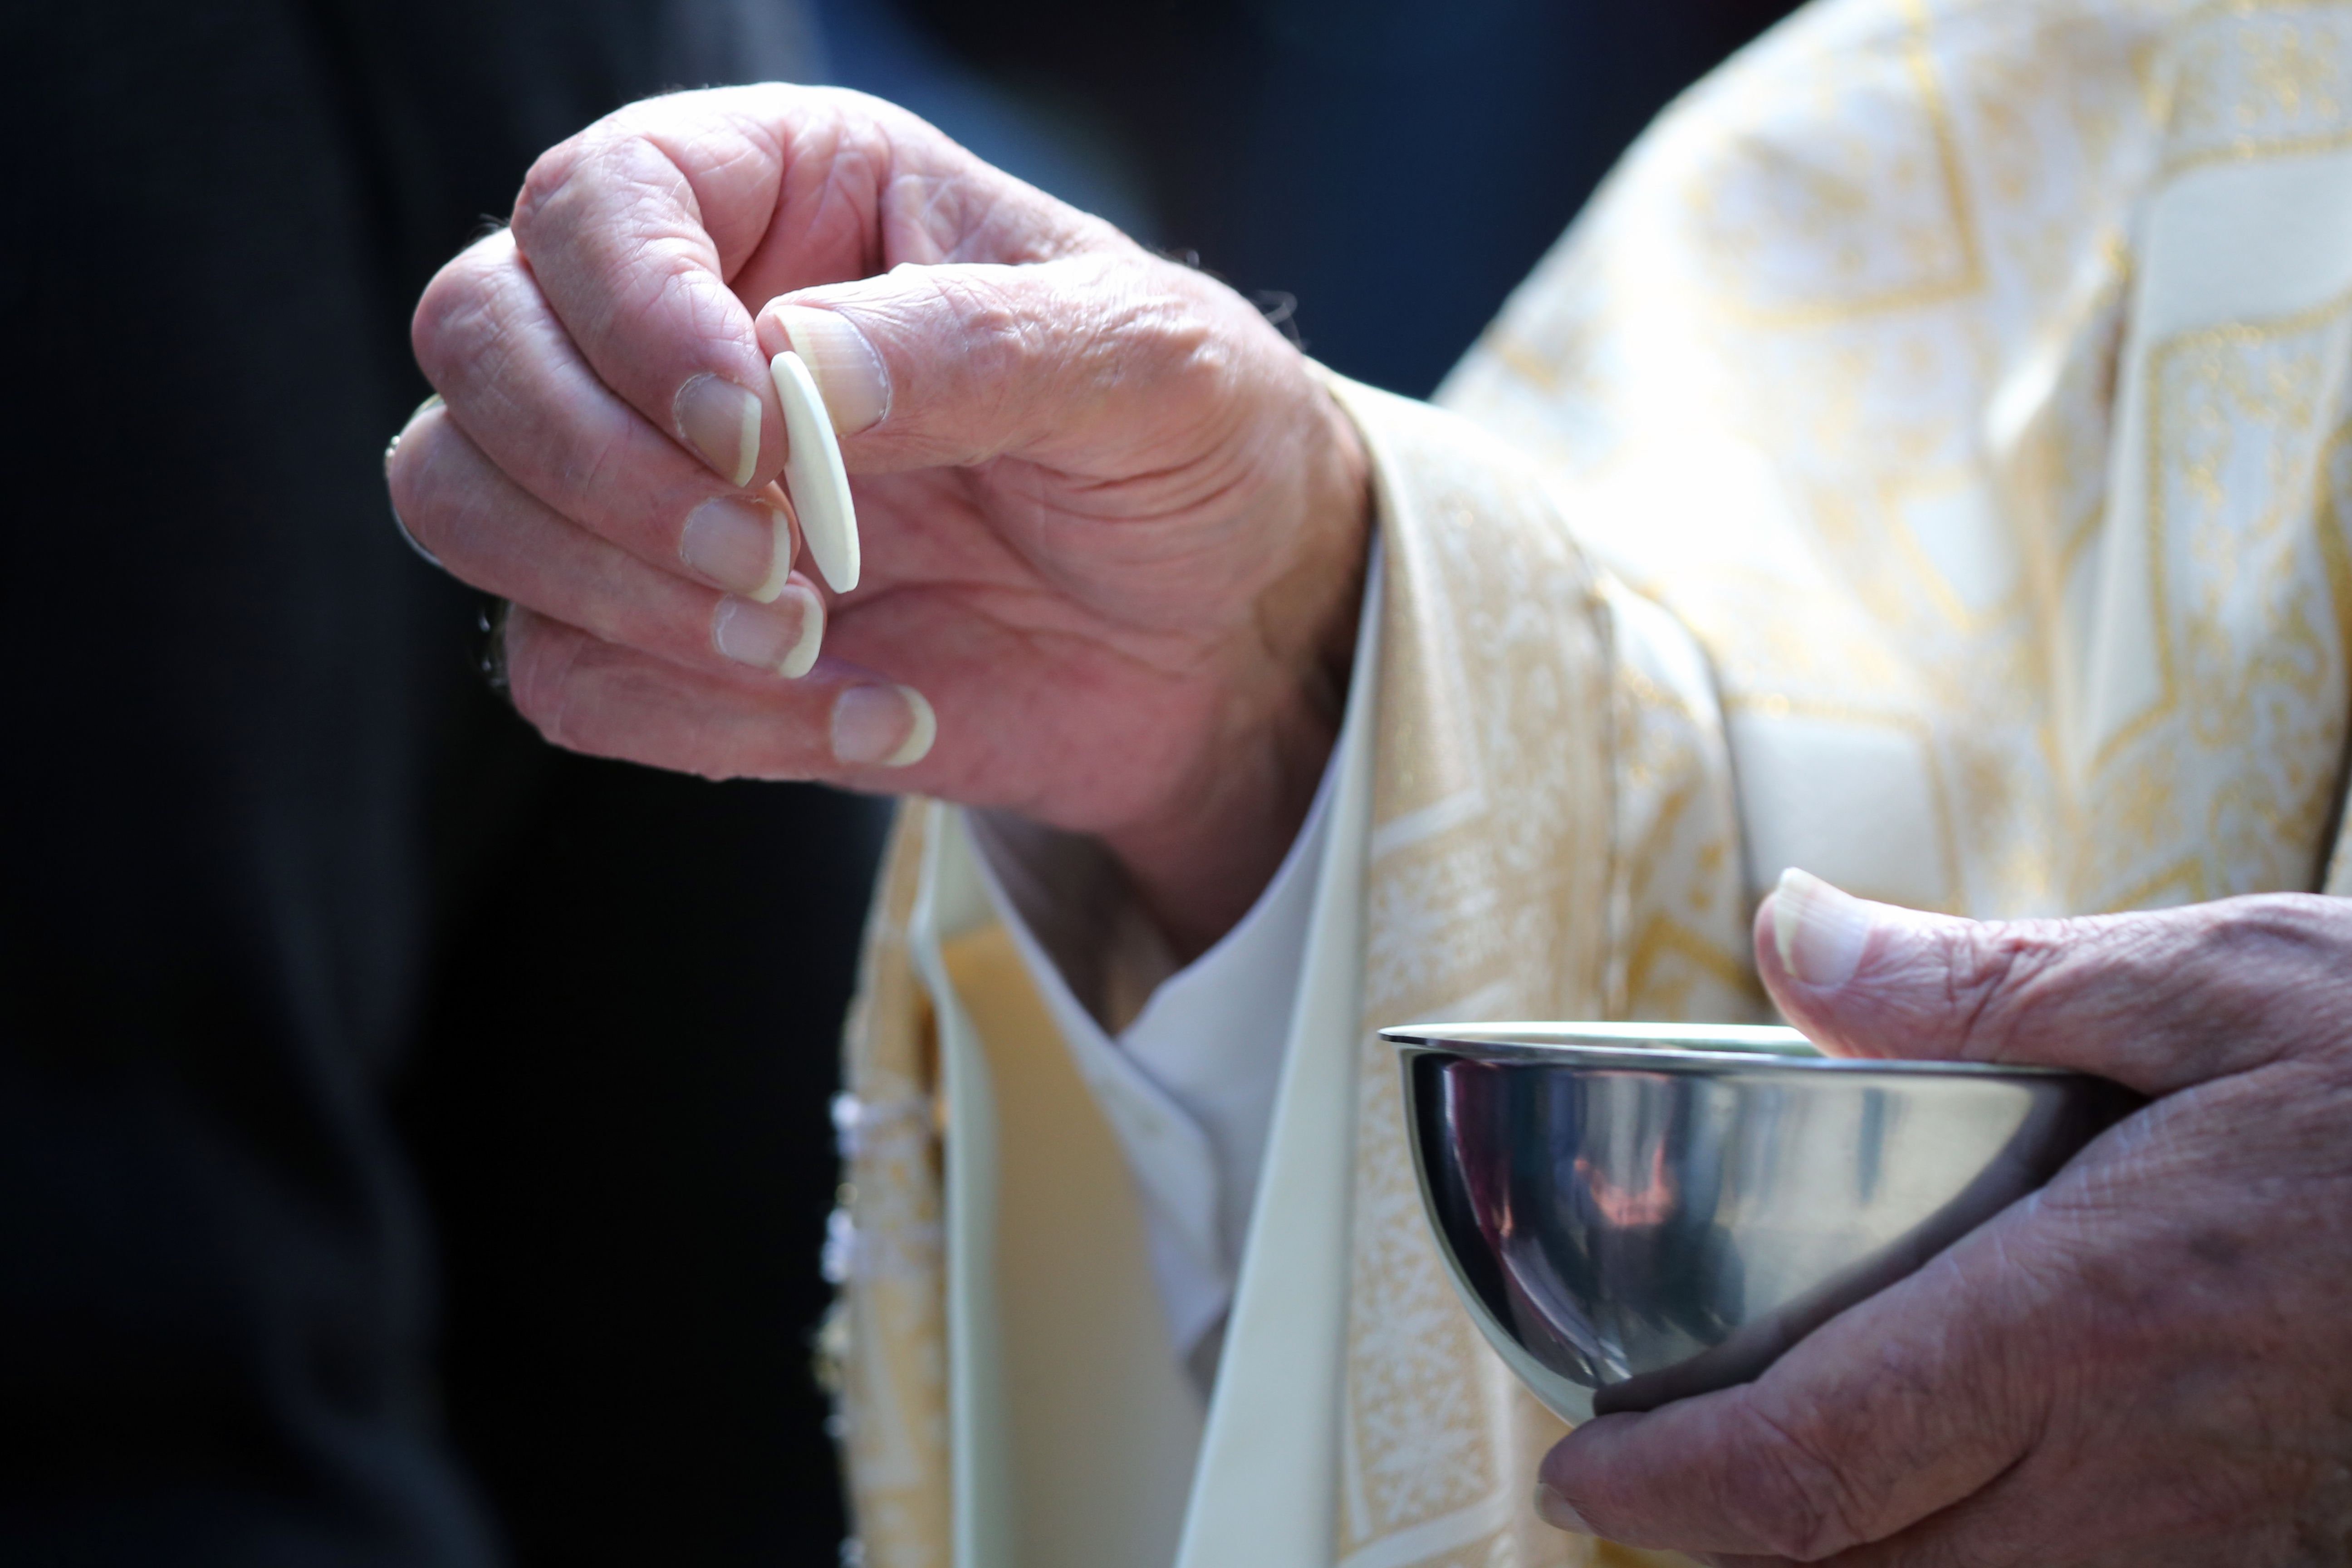 Why Do Catholics Receive Only the Host During Communion?